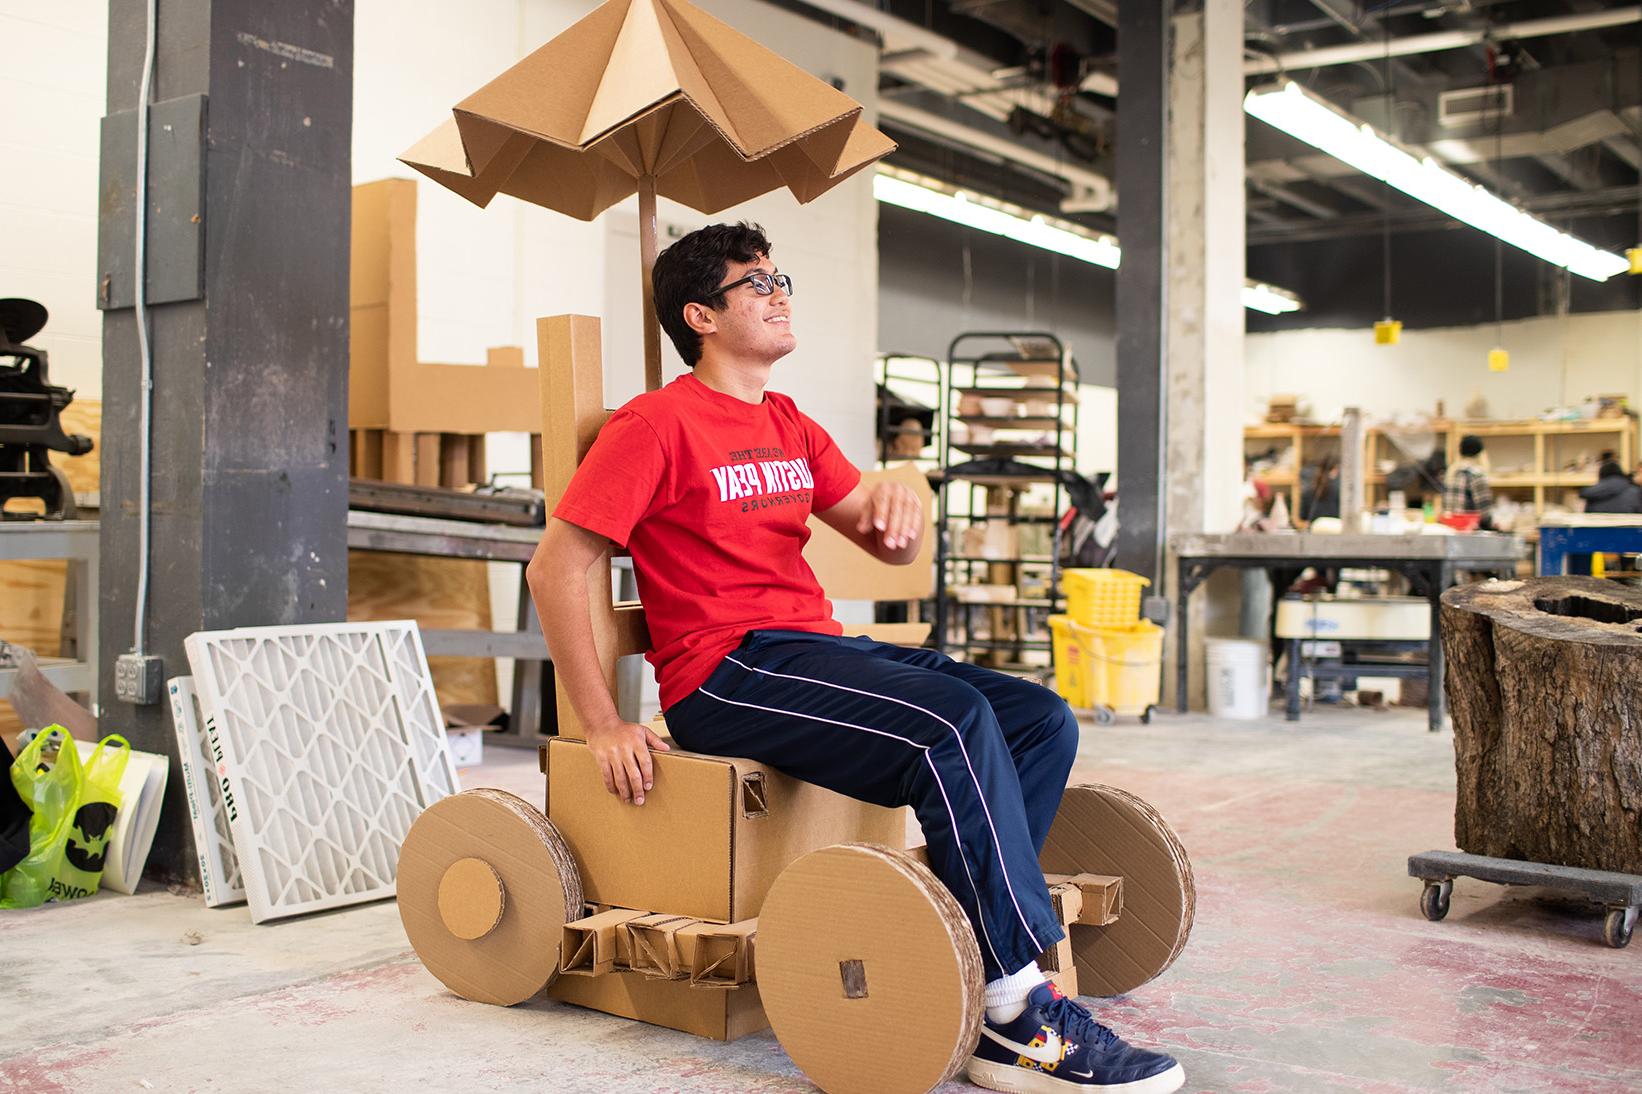 Jeremy Vega poses with his cardboard car